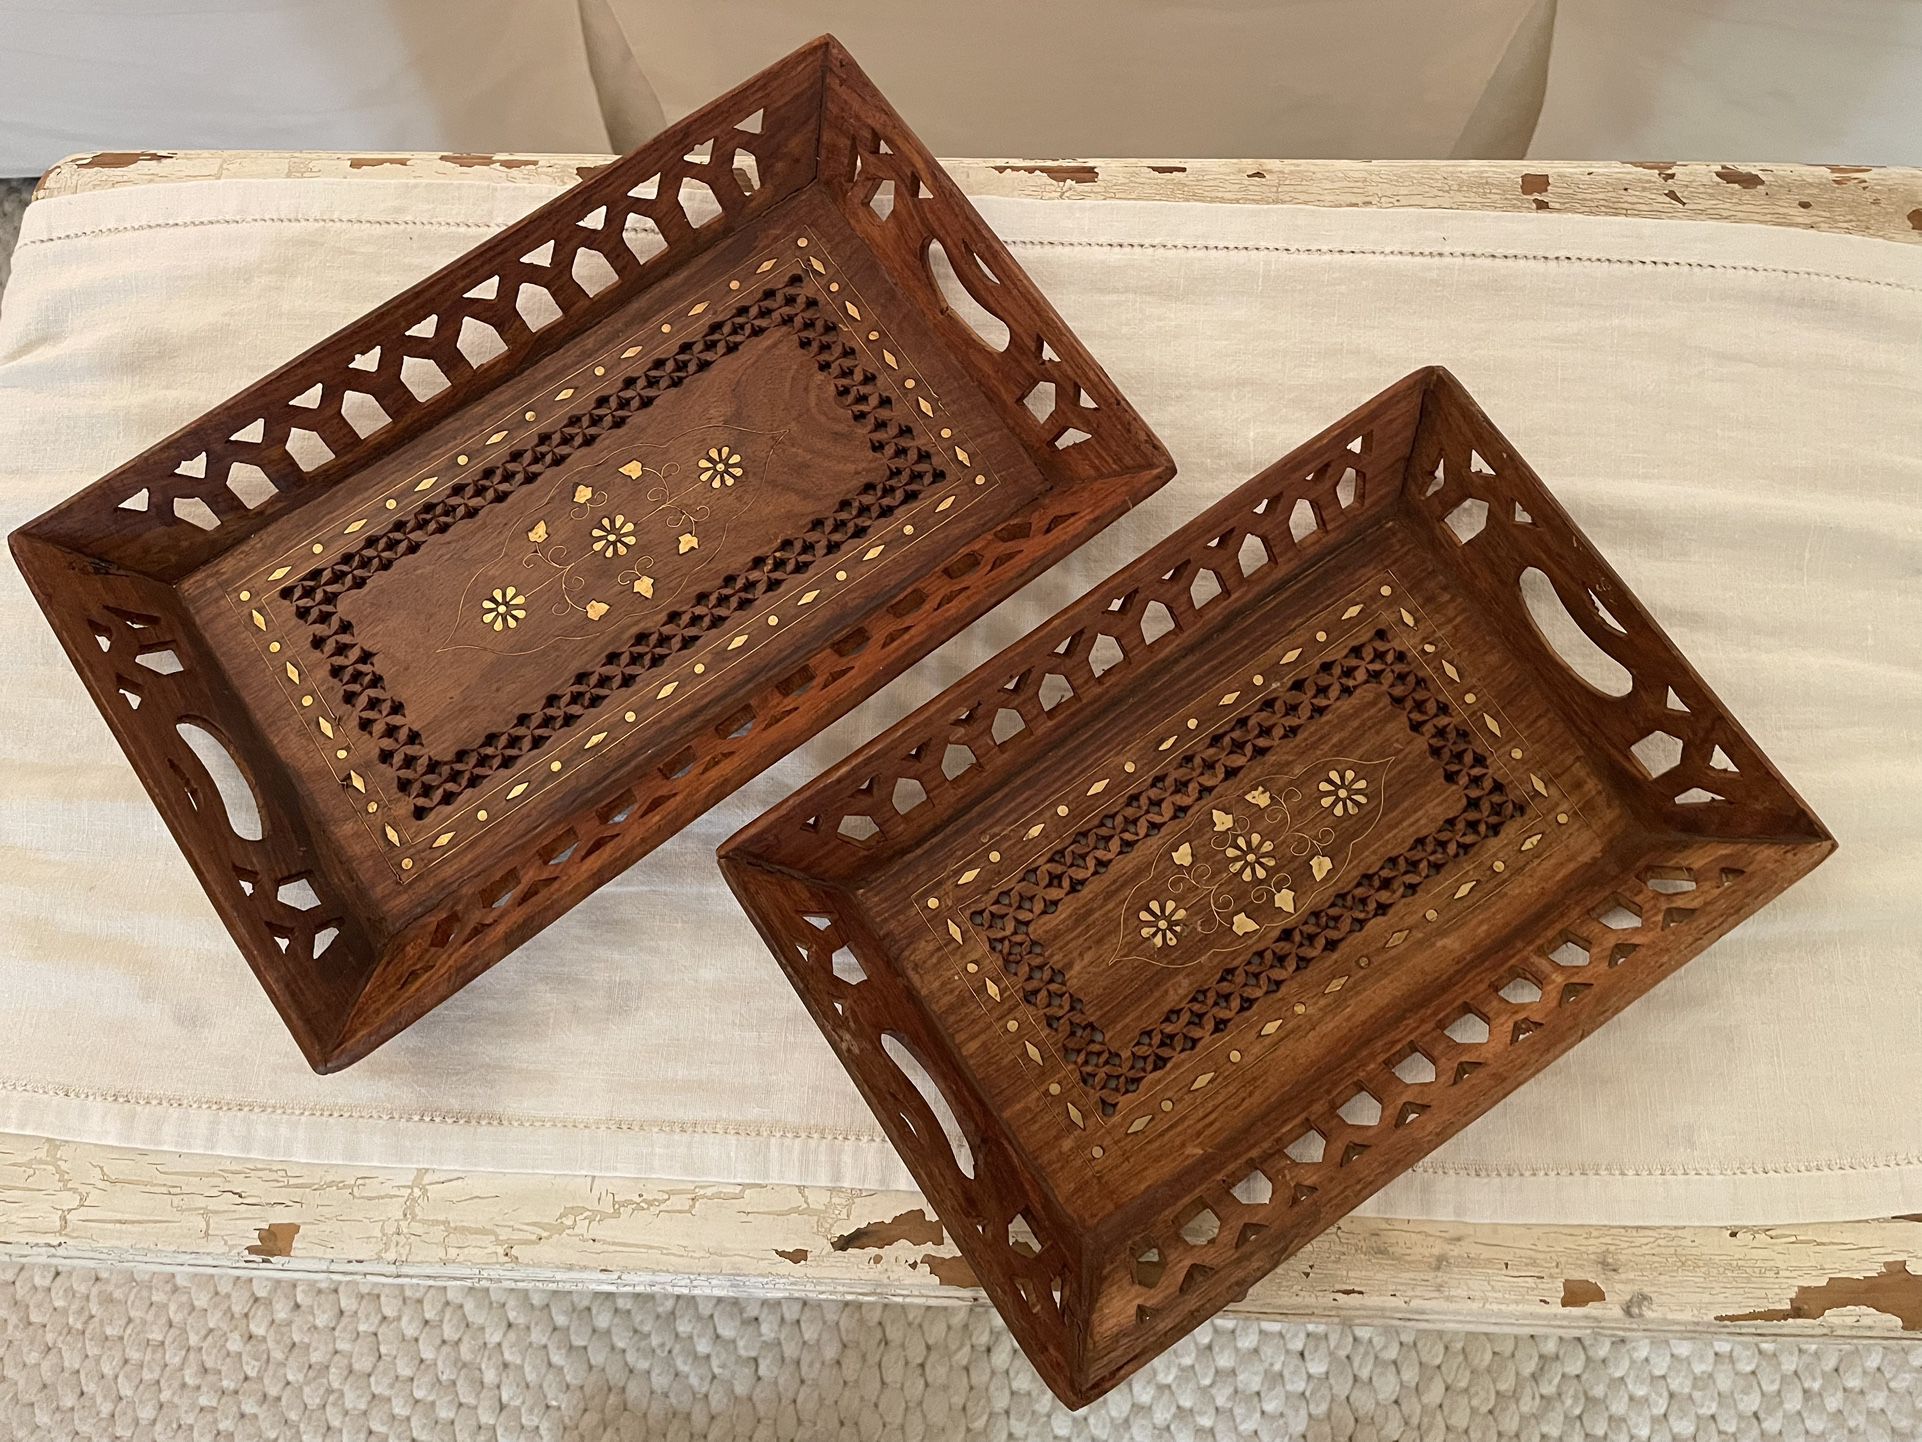 Two Antique Wood Trays